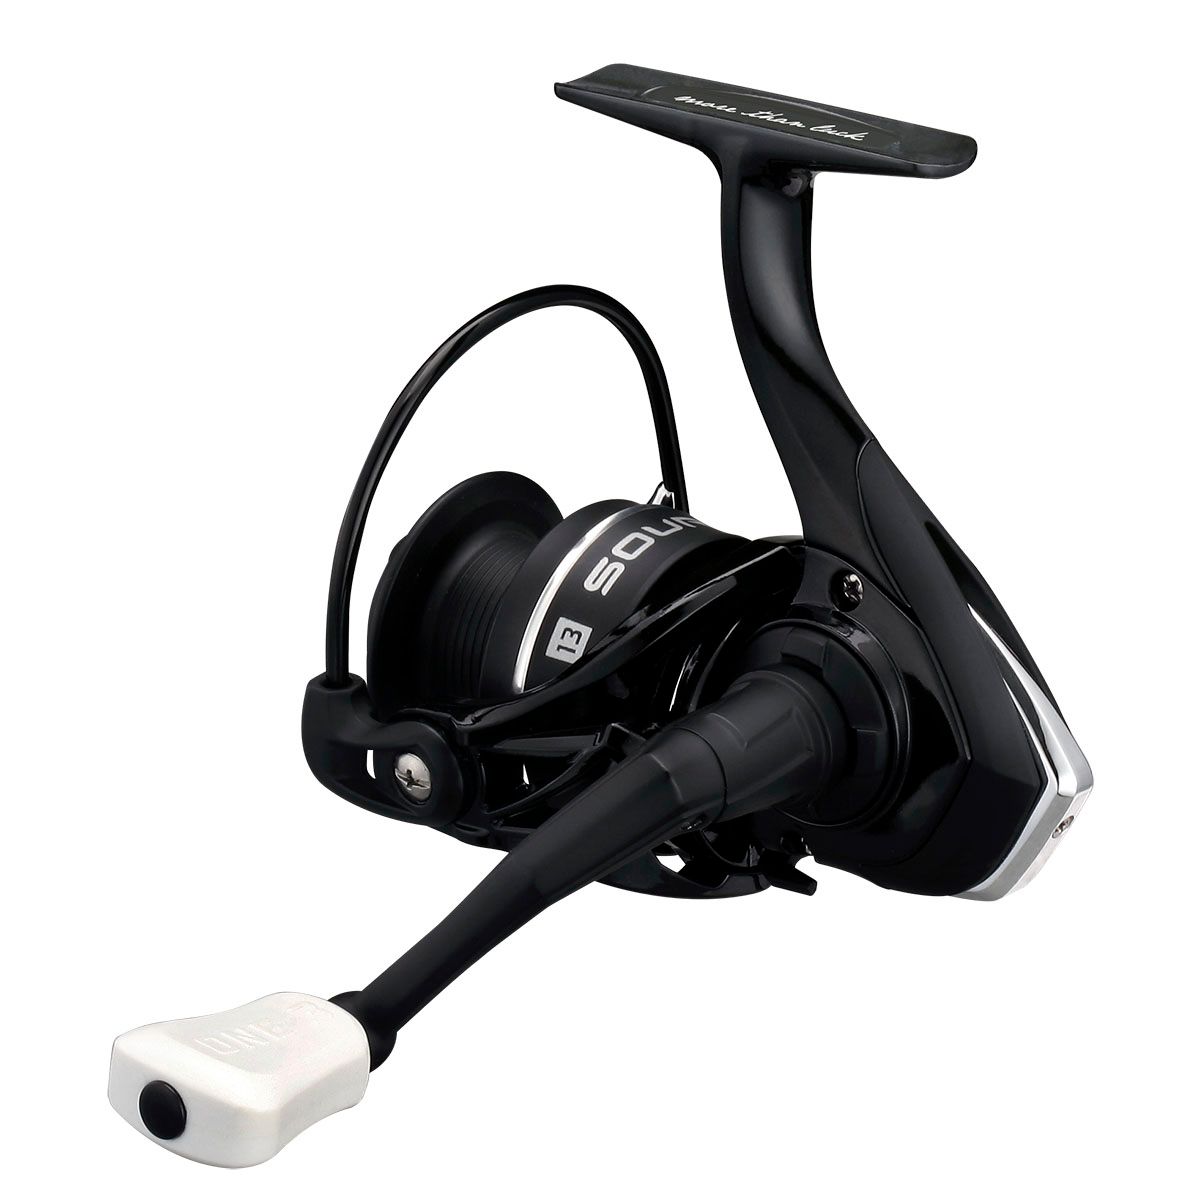 Катушка 13 Fishing source k Spinning 4000. Катушка 13 Fishing Architect a Spinning Reel 4000 5.2:1. Катушка catch a Monster. Reels Size.